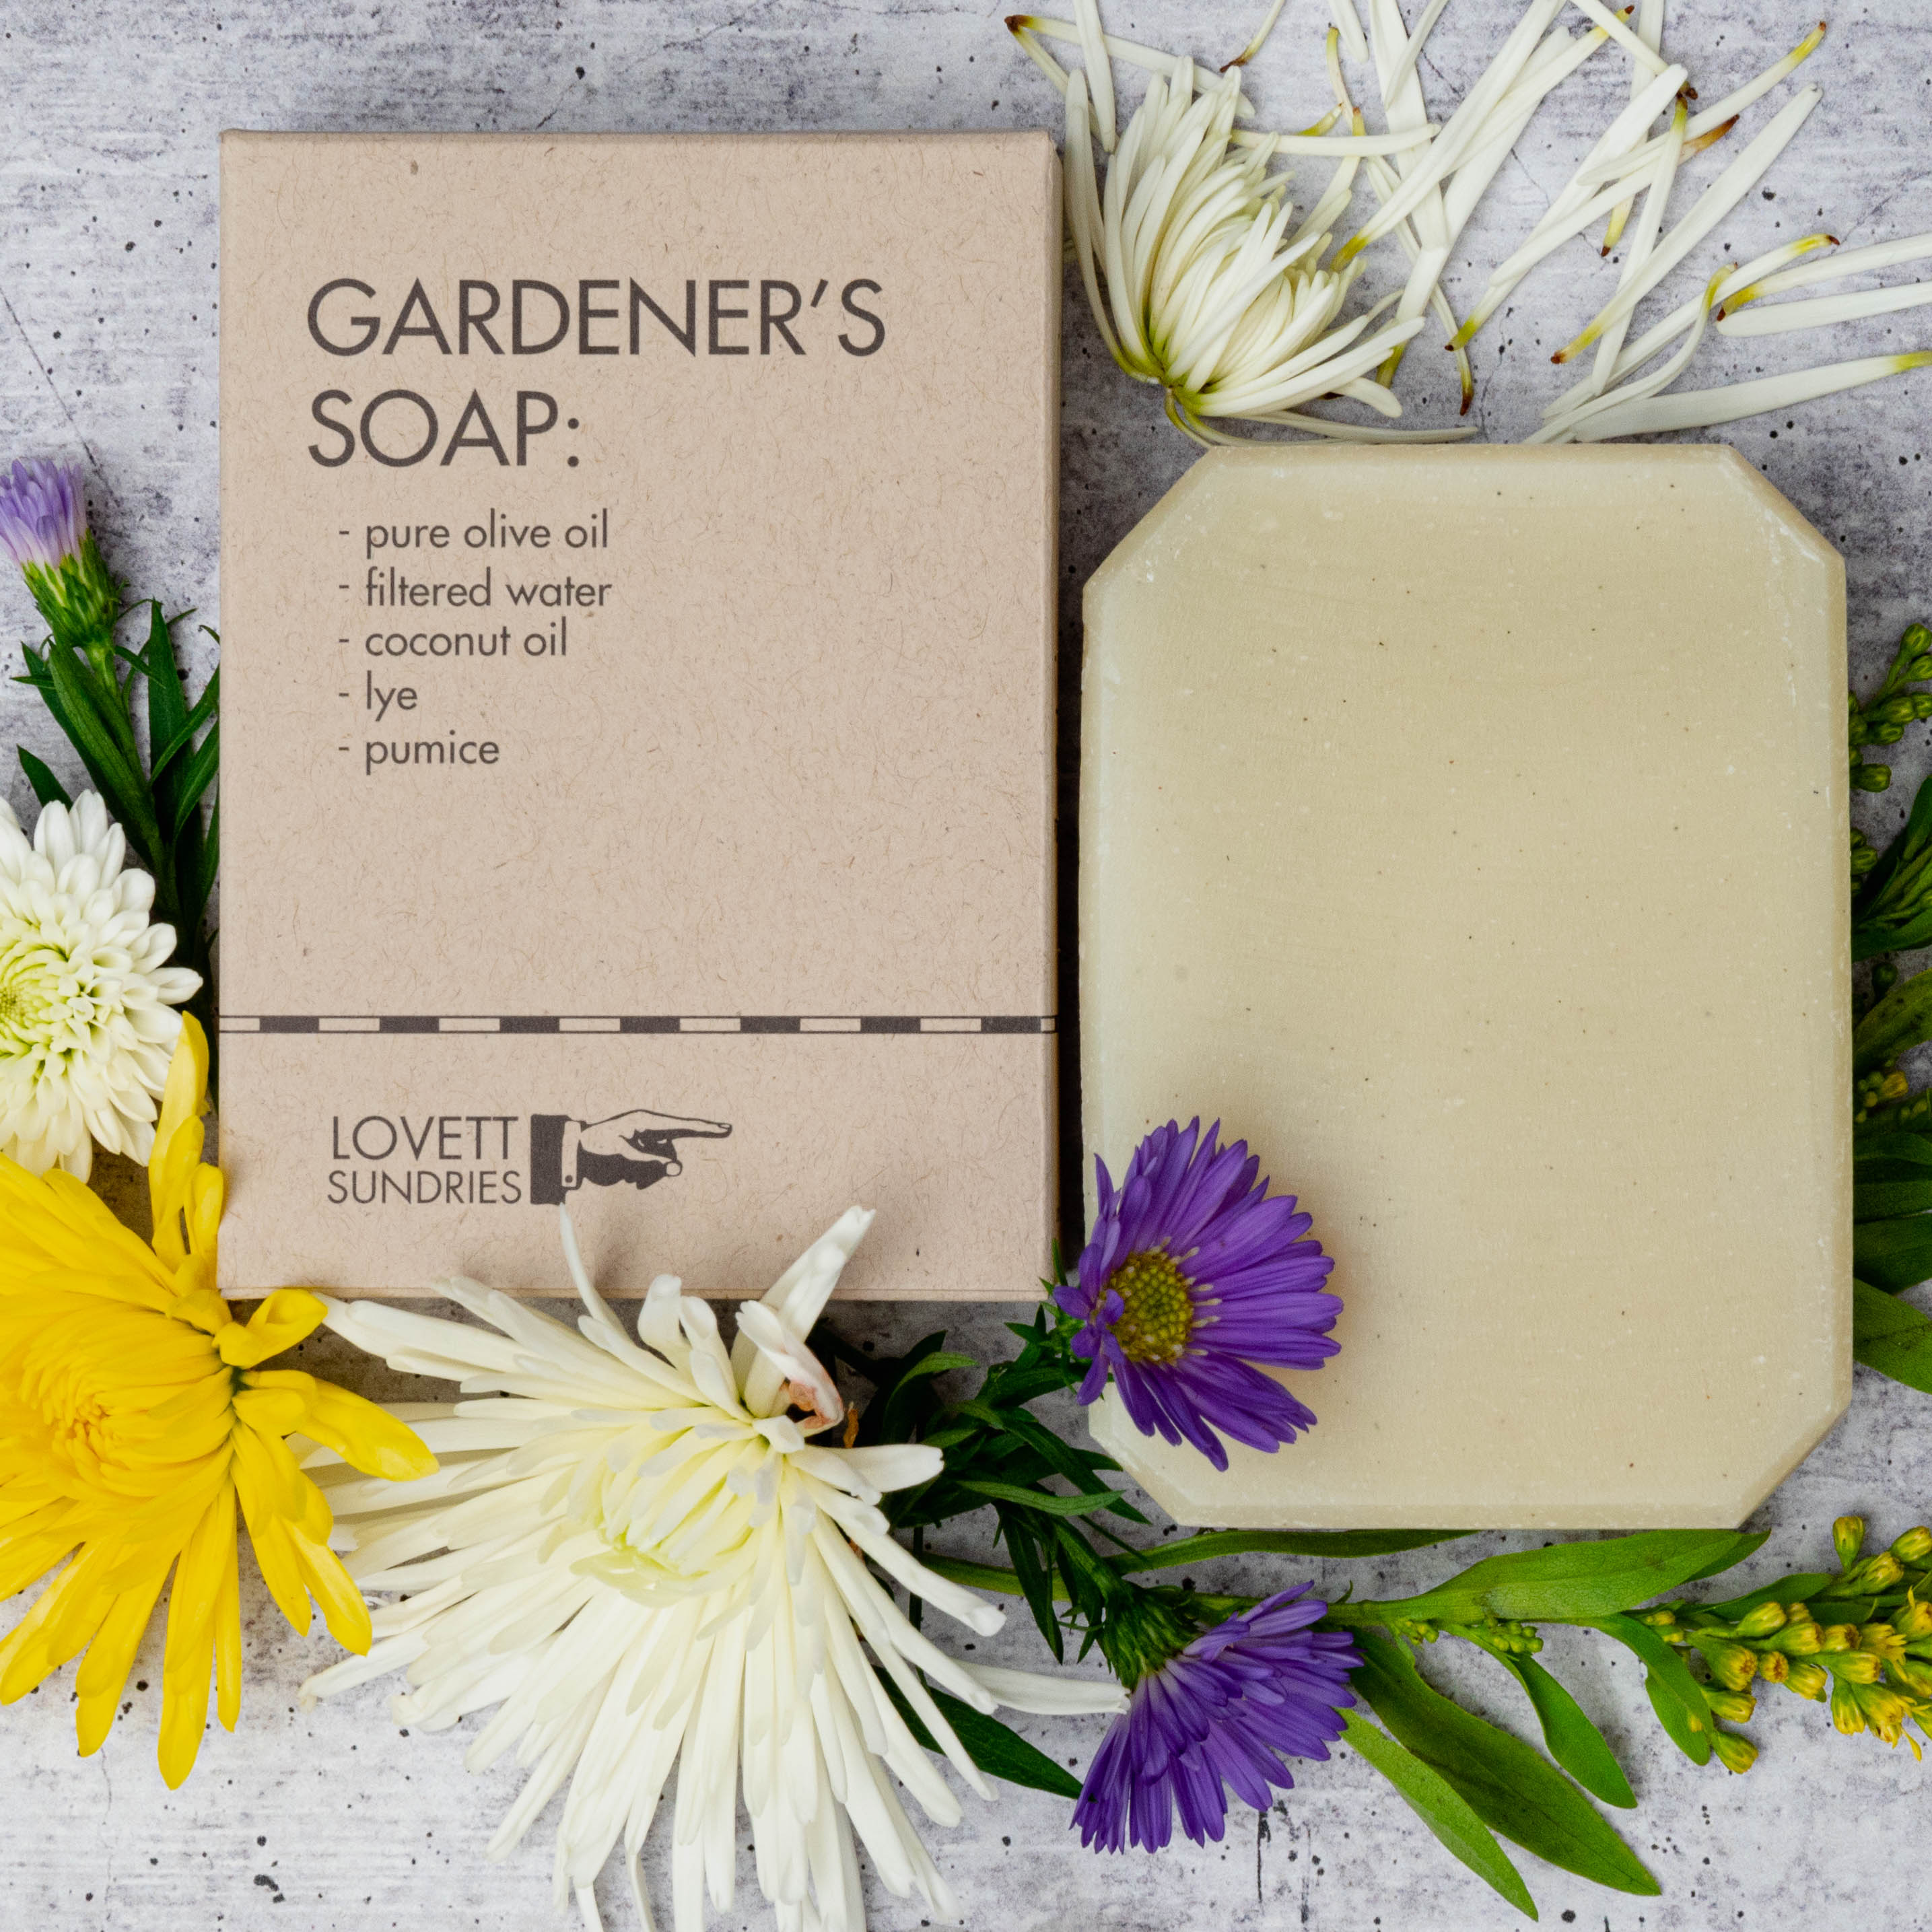 Box of Gardener's Soap surrounded by flowers.